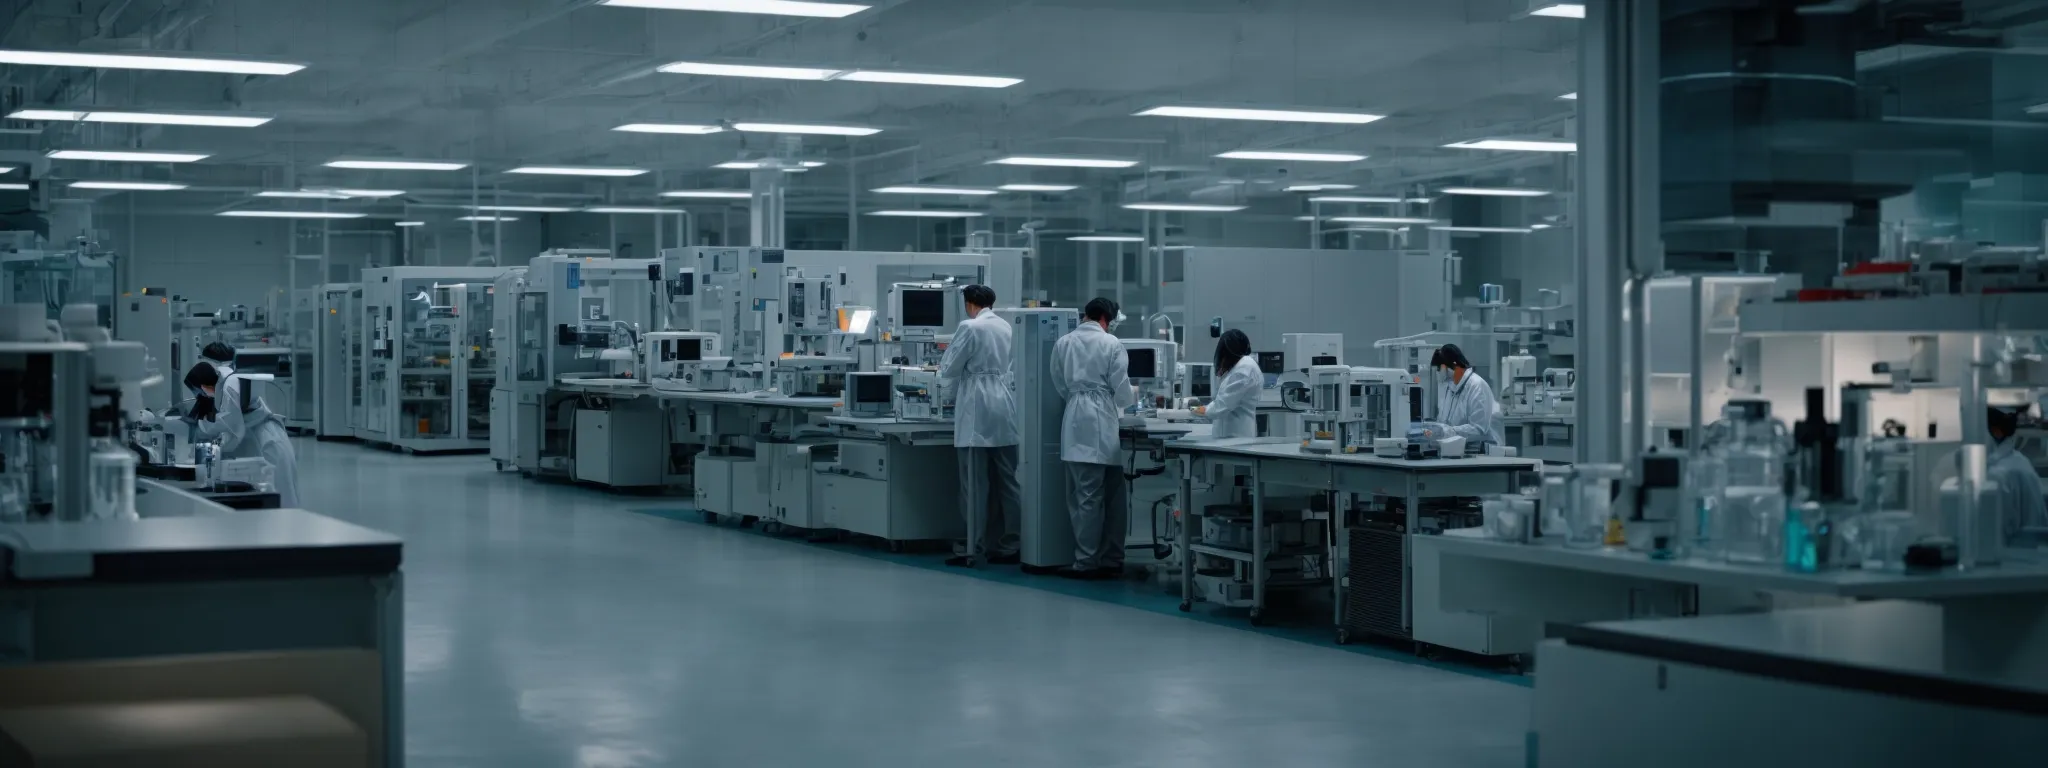 a bustling biotech laboratory with researchers working on high-tech equipment.